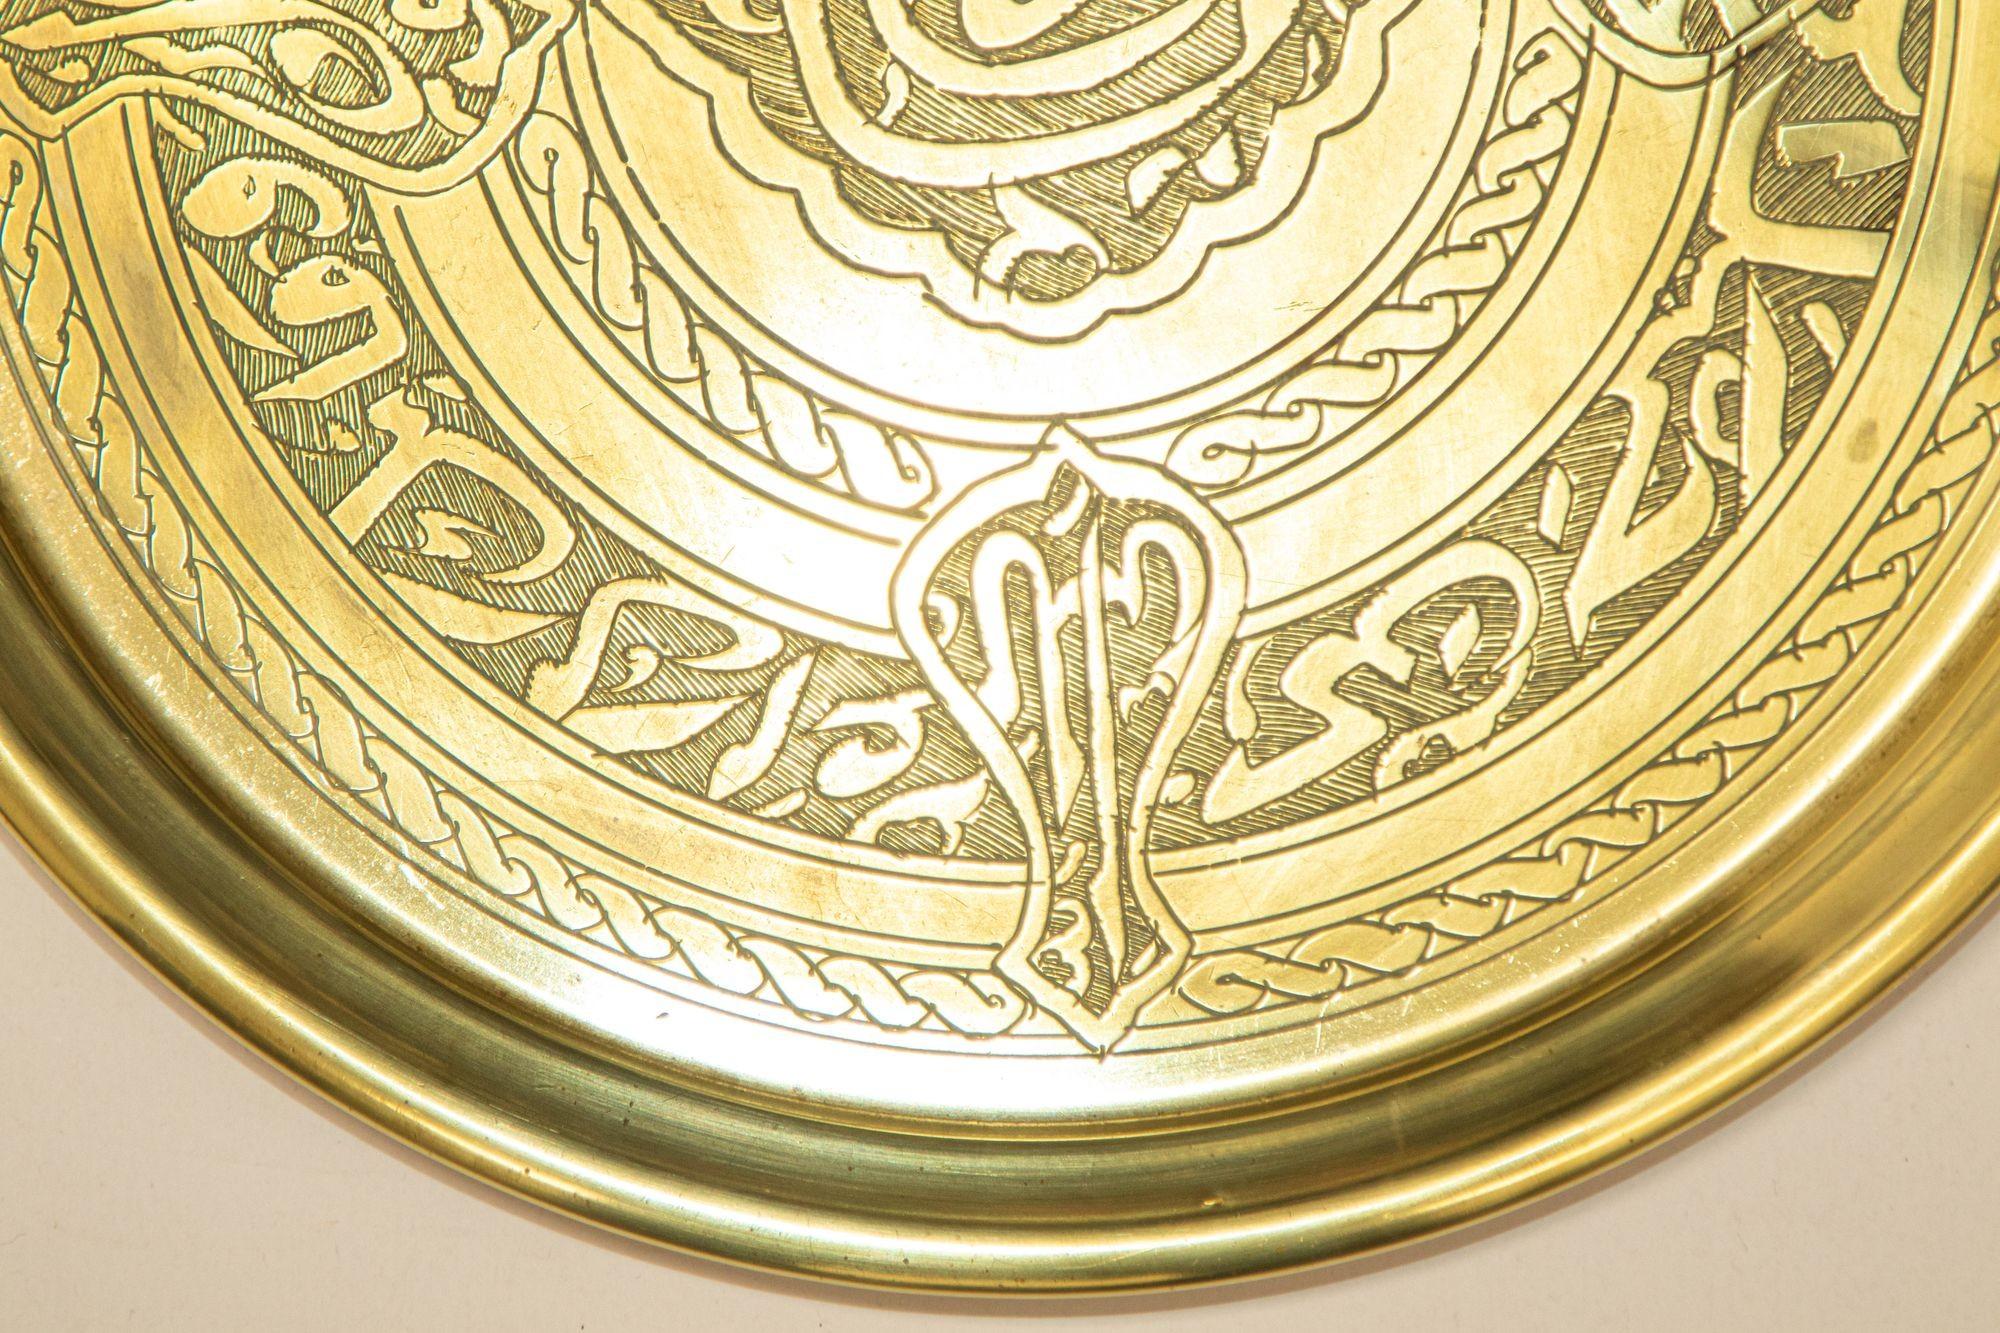 1940s Collectible Islamic Art Handcrafted Chased Etched Polished Brass Tray For Sale 1